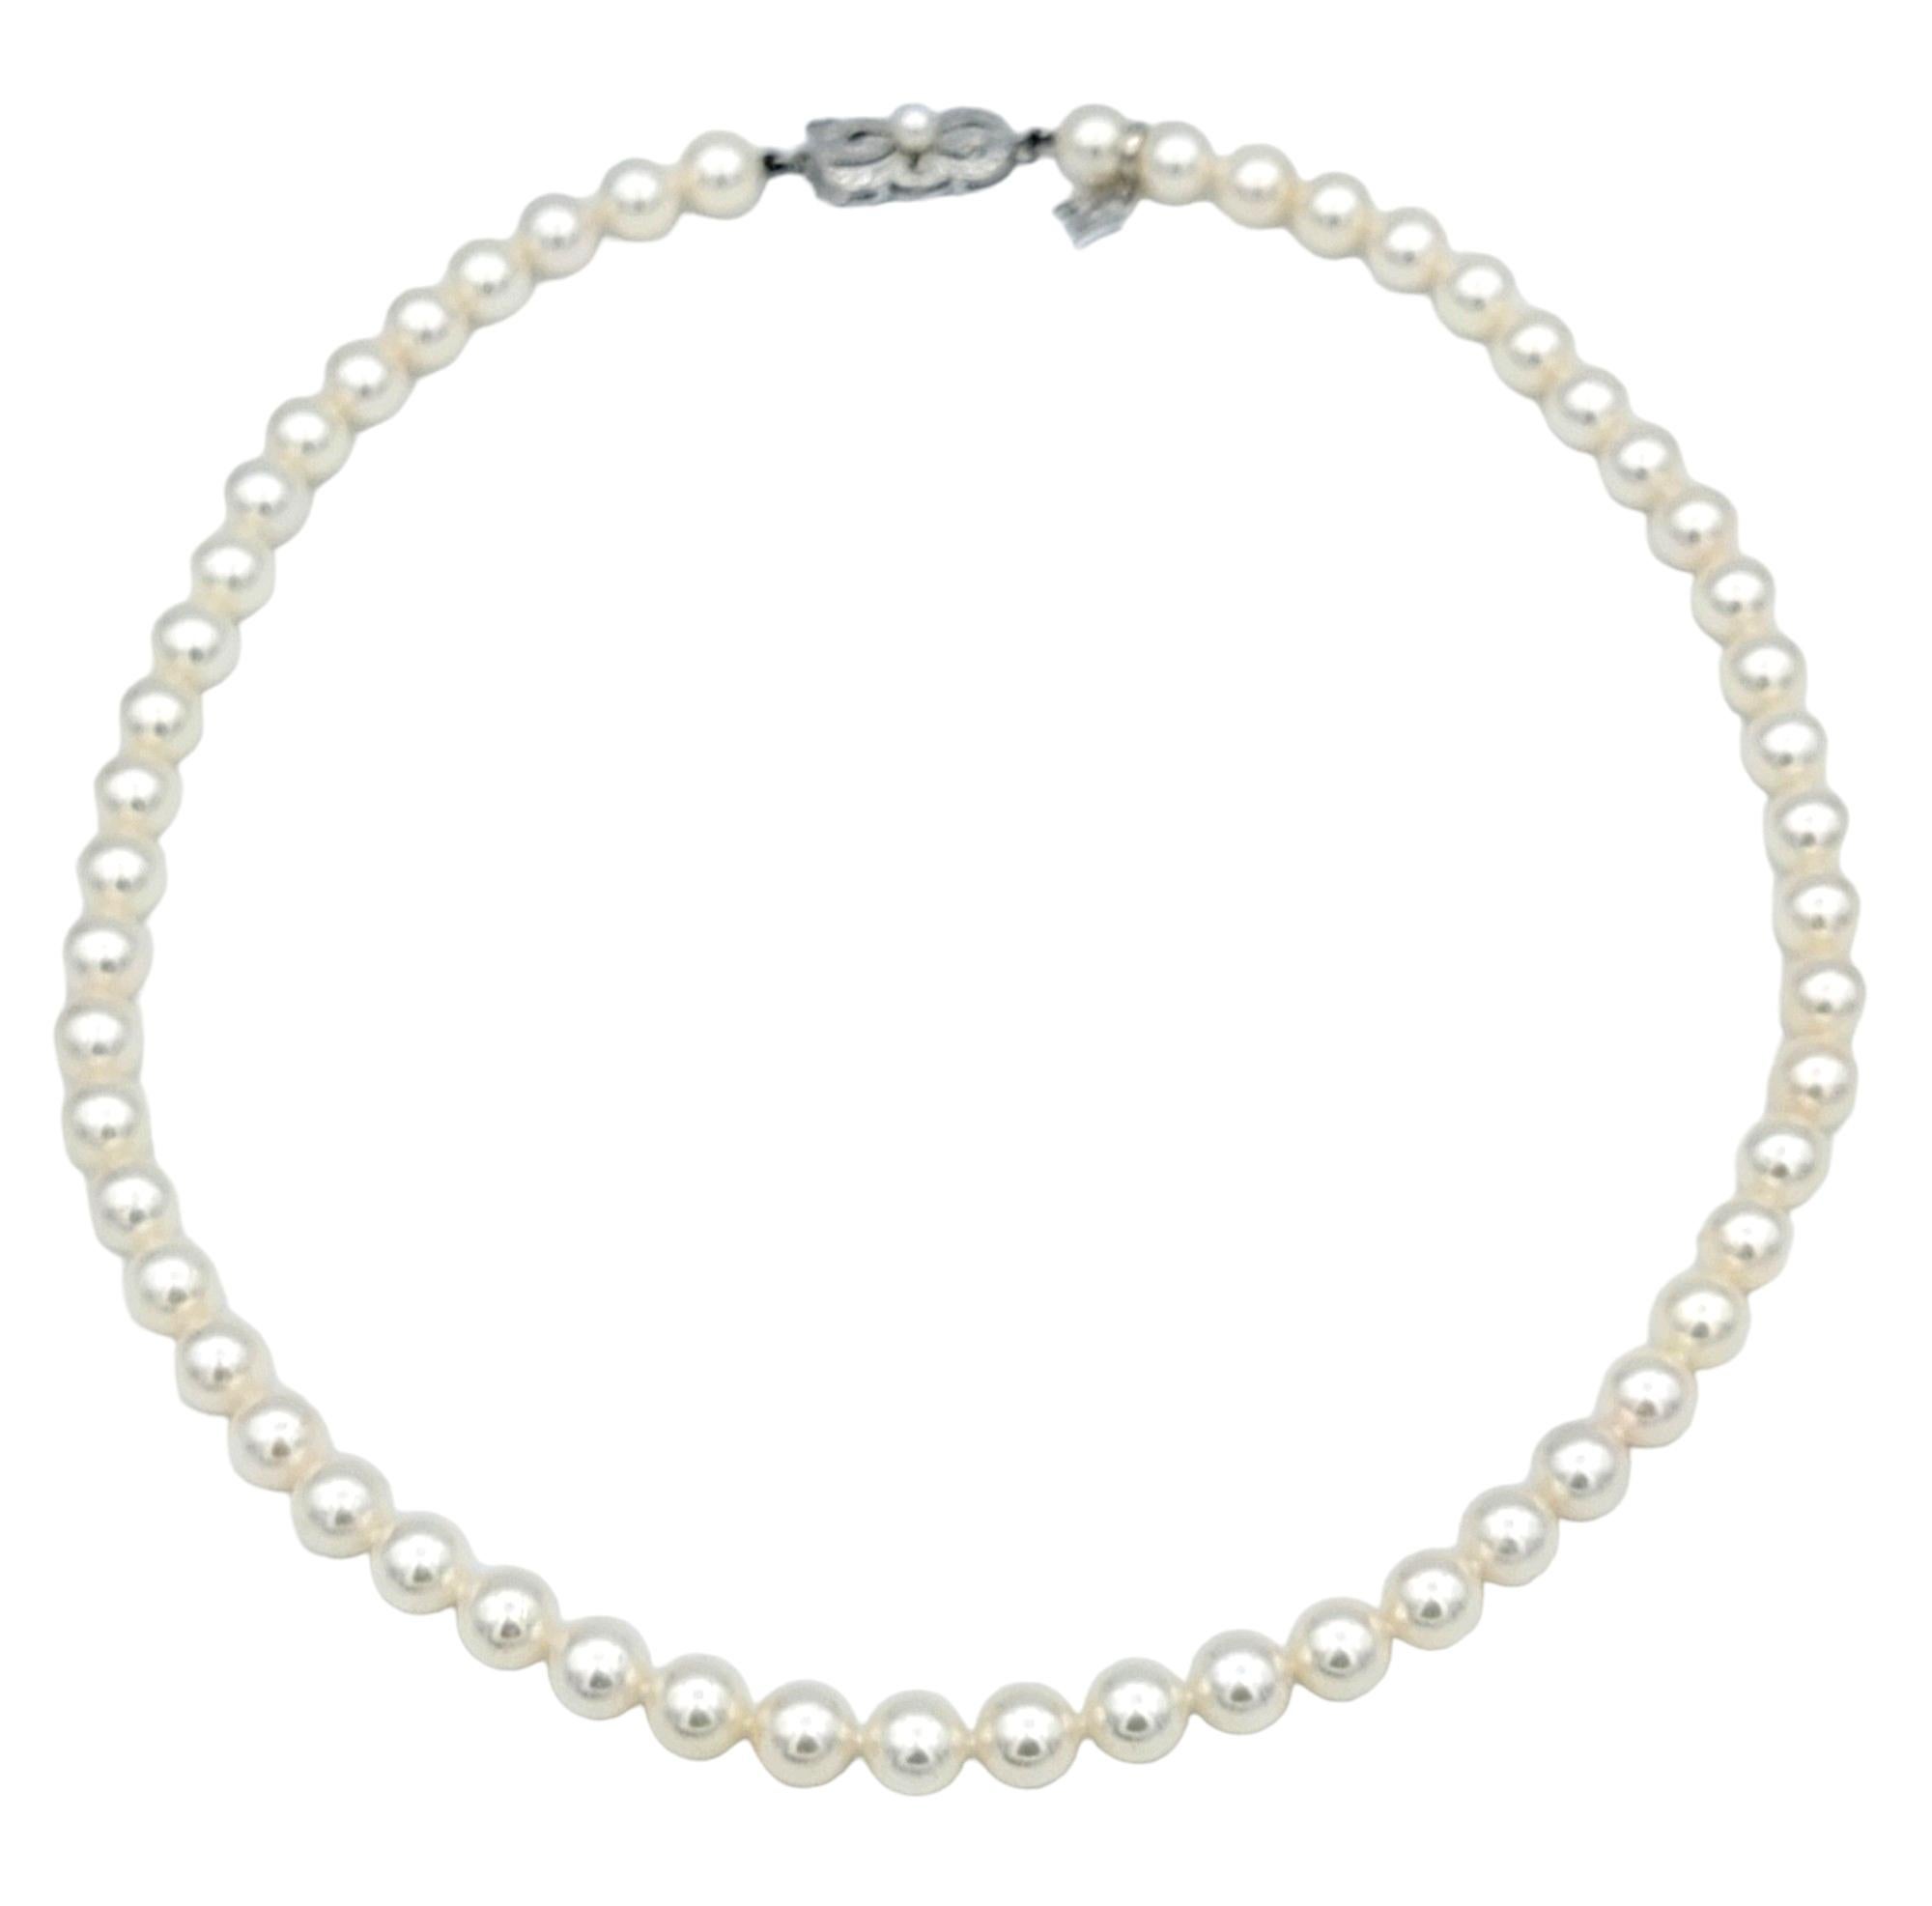 This gorgeous Mikimoto Akoya pearl necklace epitomizes elegance and refinement, showcasing the brand's renowned craftsmanship and the natural beauty of pearls. Each lustrous creamy pearl is meticulously selected and expertly matched to create a